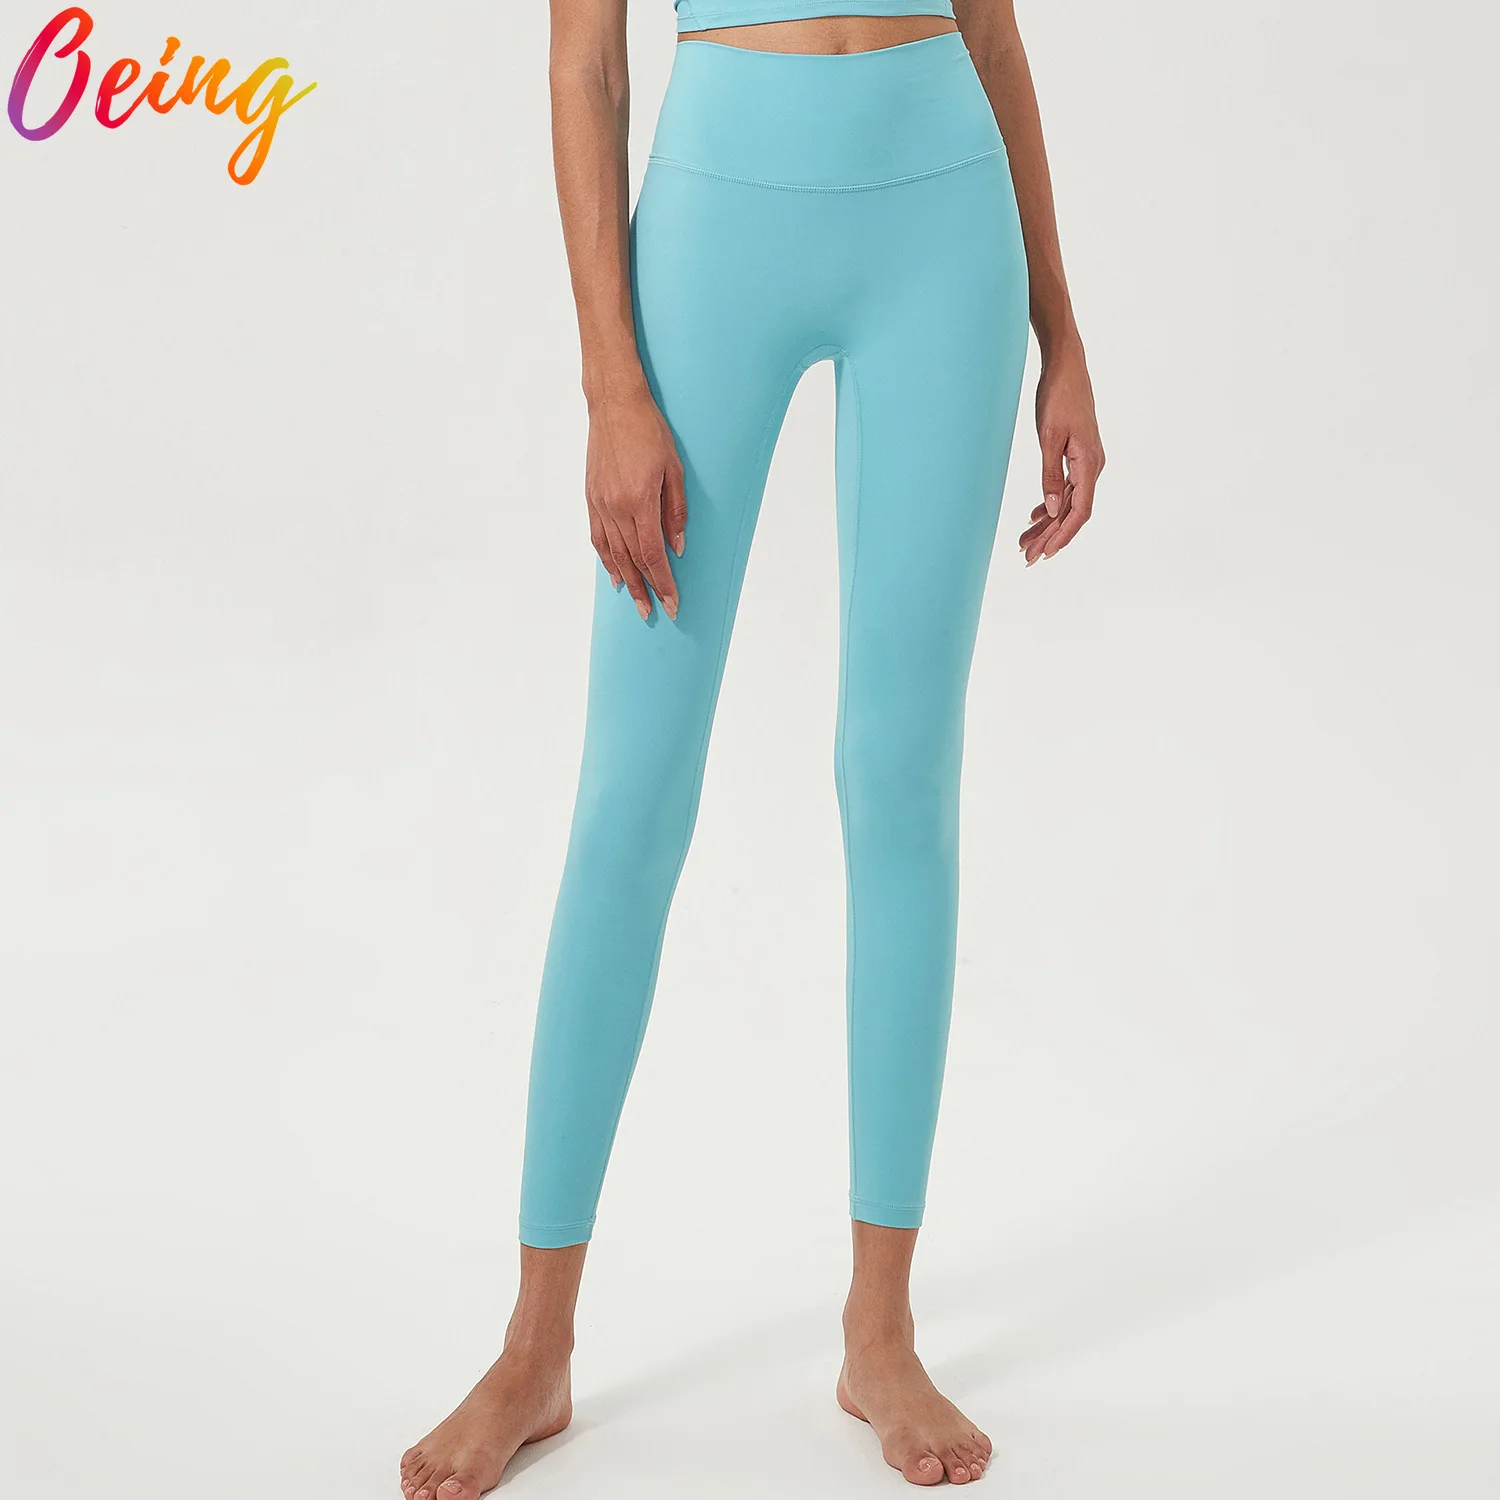 

OEING Seamless Yoga Leggings High Waist Stretchy Push Up Sporting Pants Shaping Hips Lifting Women Bottoms 2022 GYM Fitness